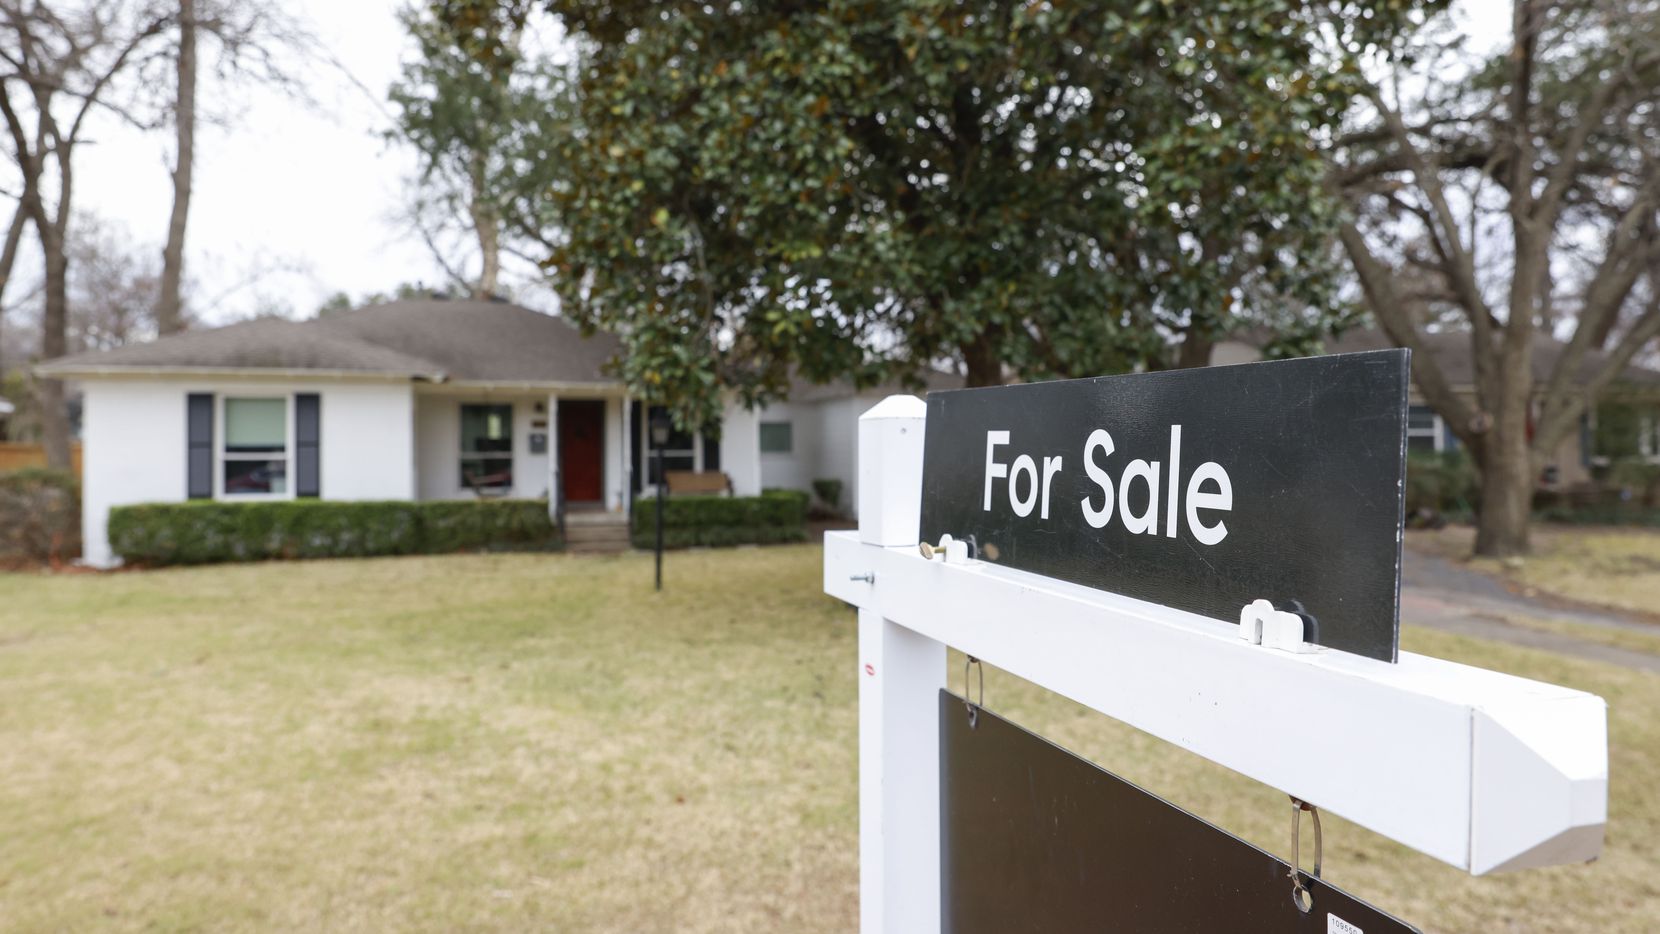 A new report from Redfin found that 45.8% of homes in the Dallas area and 44.7% in the Fort...